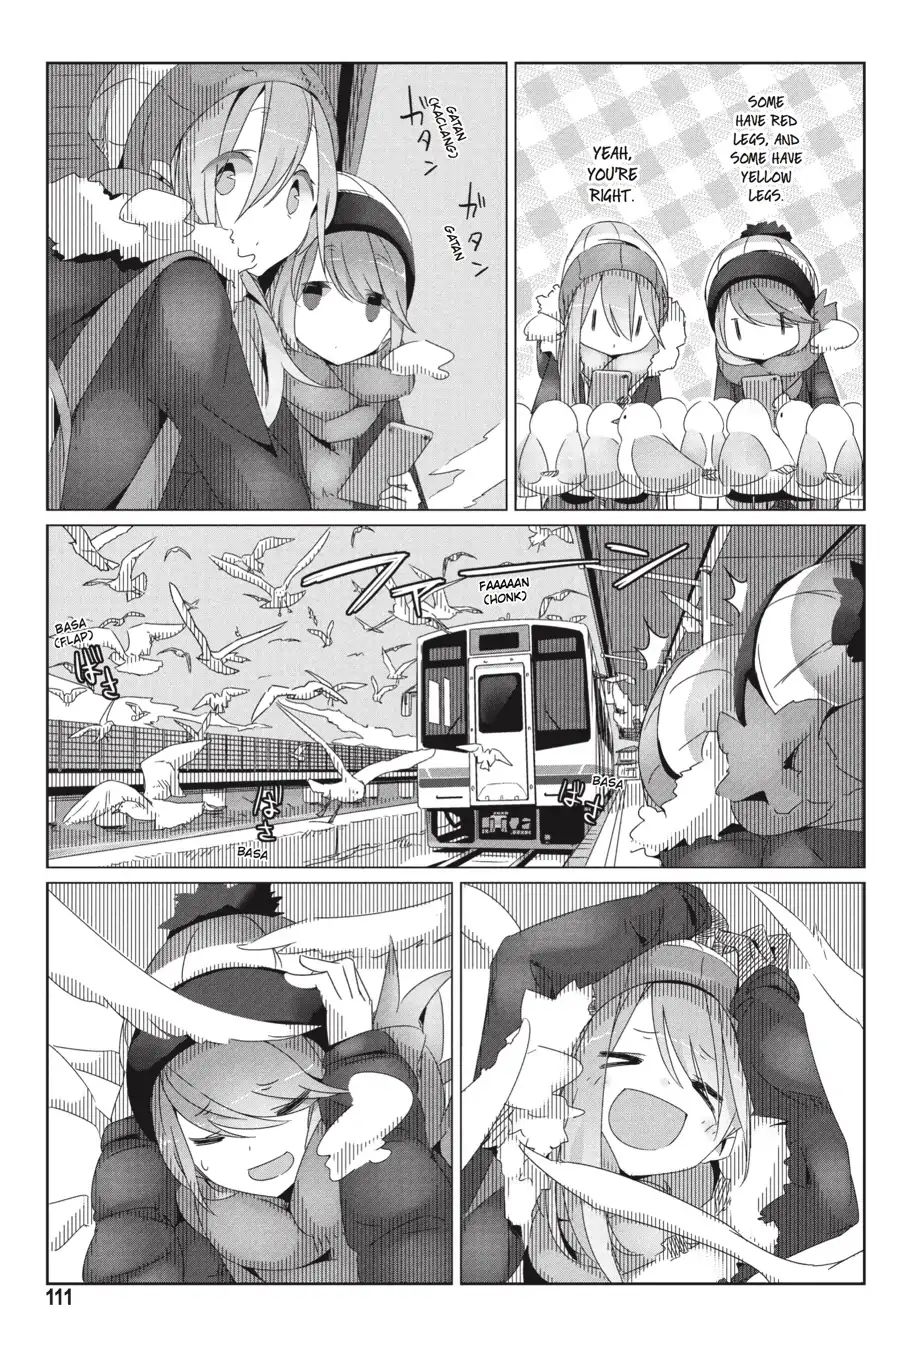 Yurucamp Vol.5 Chapter 27: The Ocean, the Lake, and Some Lucky Camping